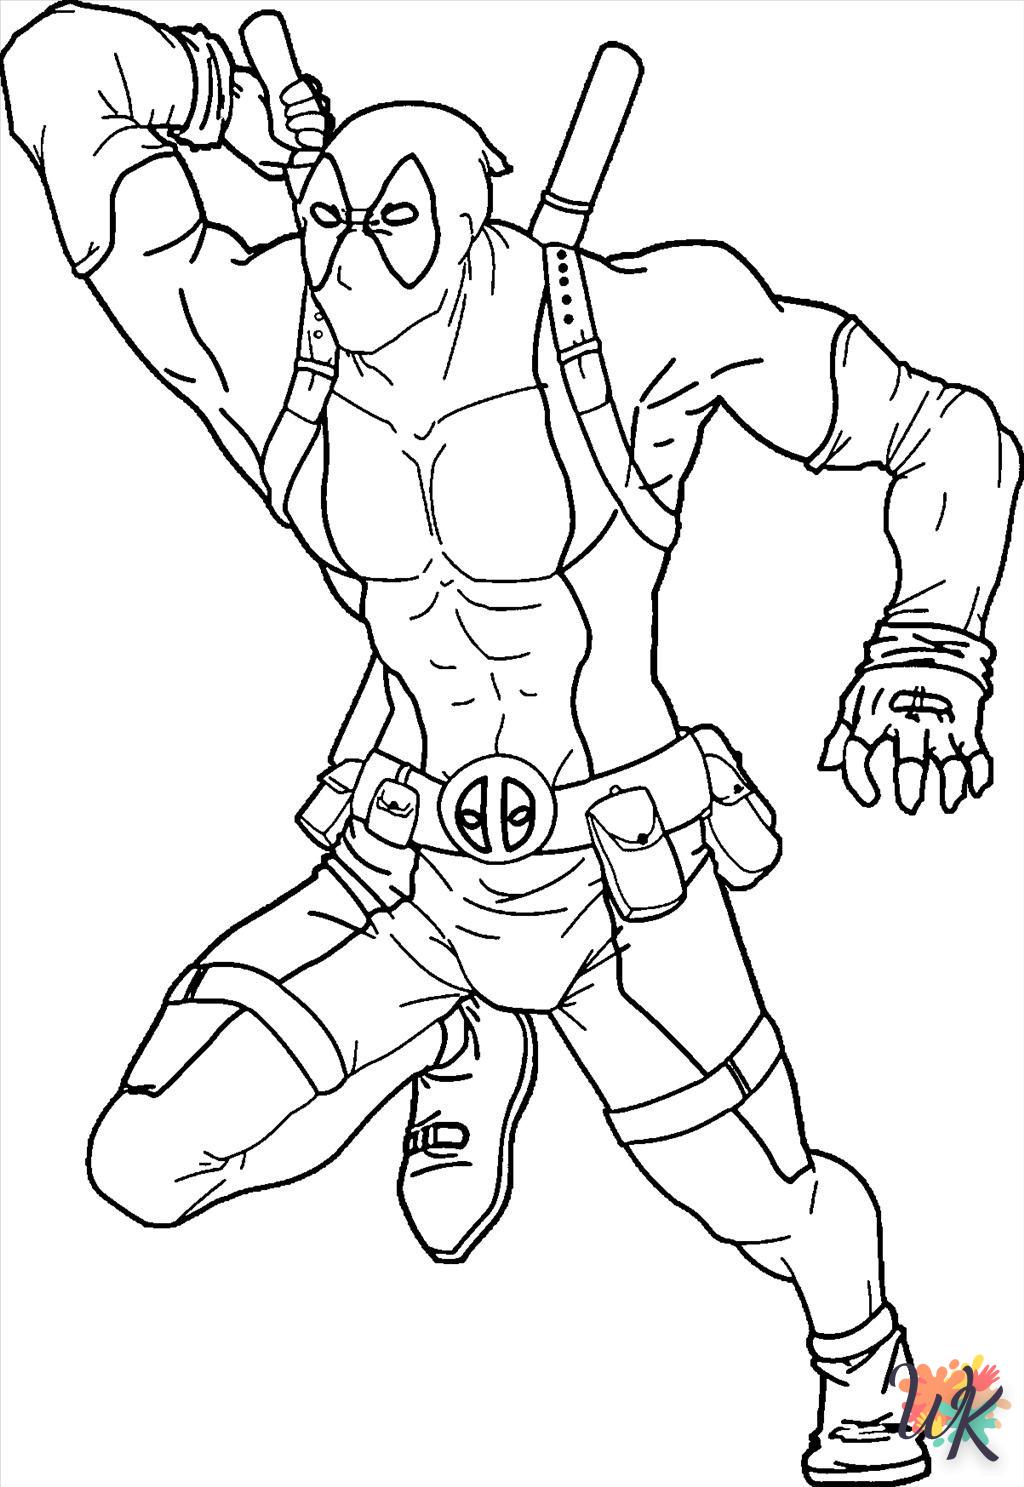 Deadpool free coloring pages